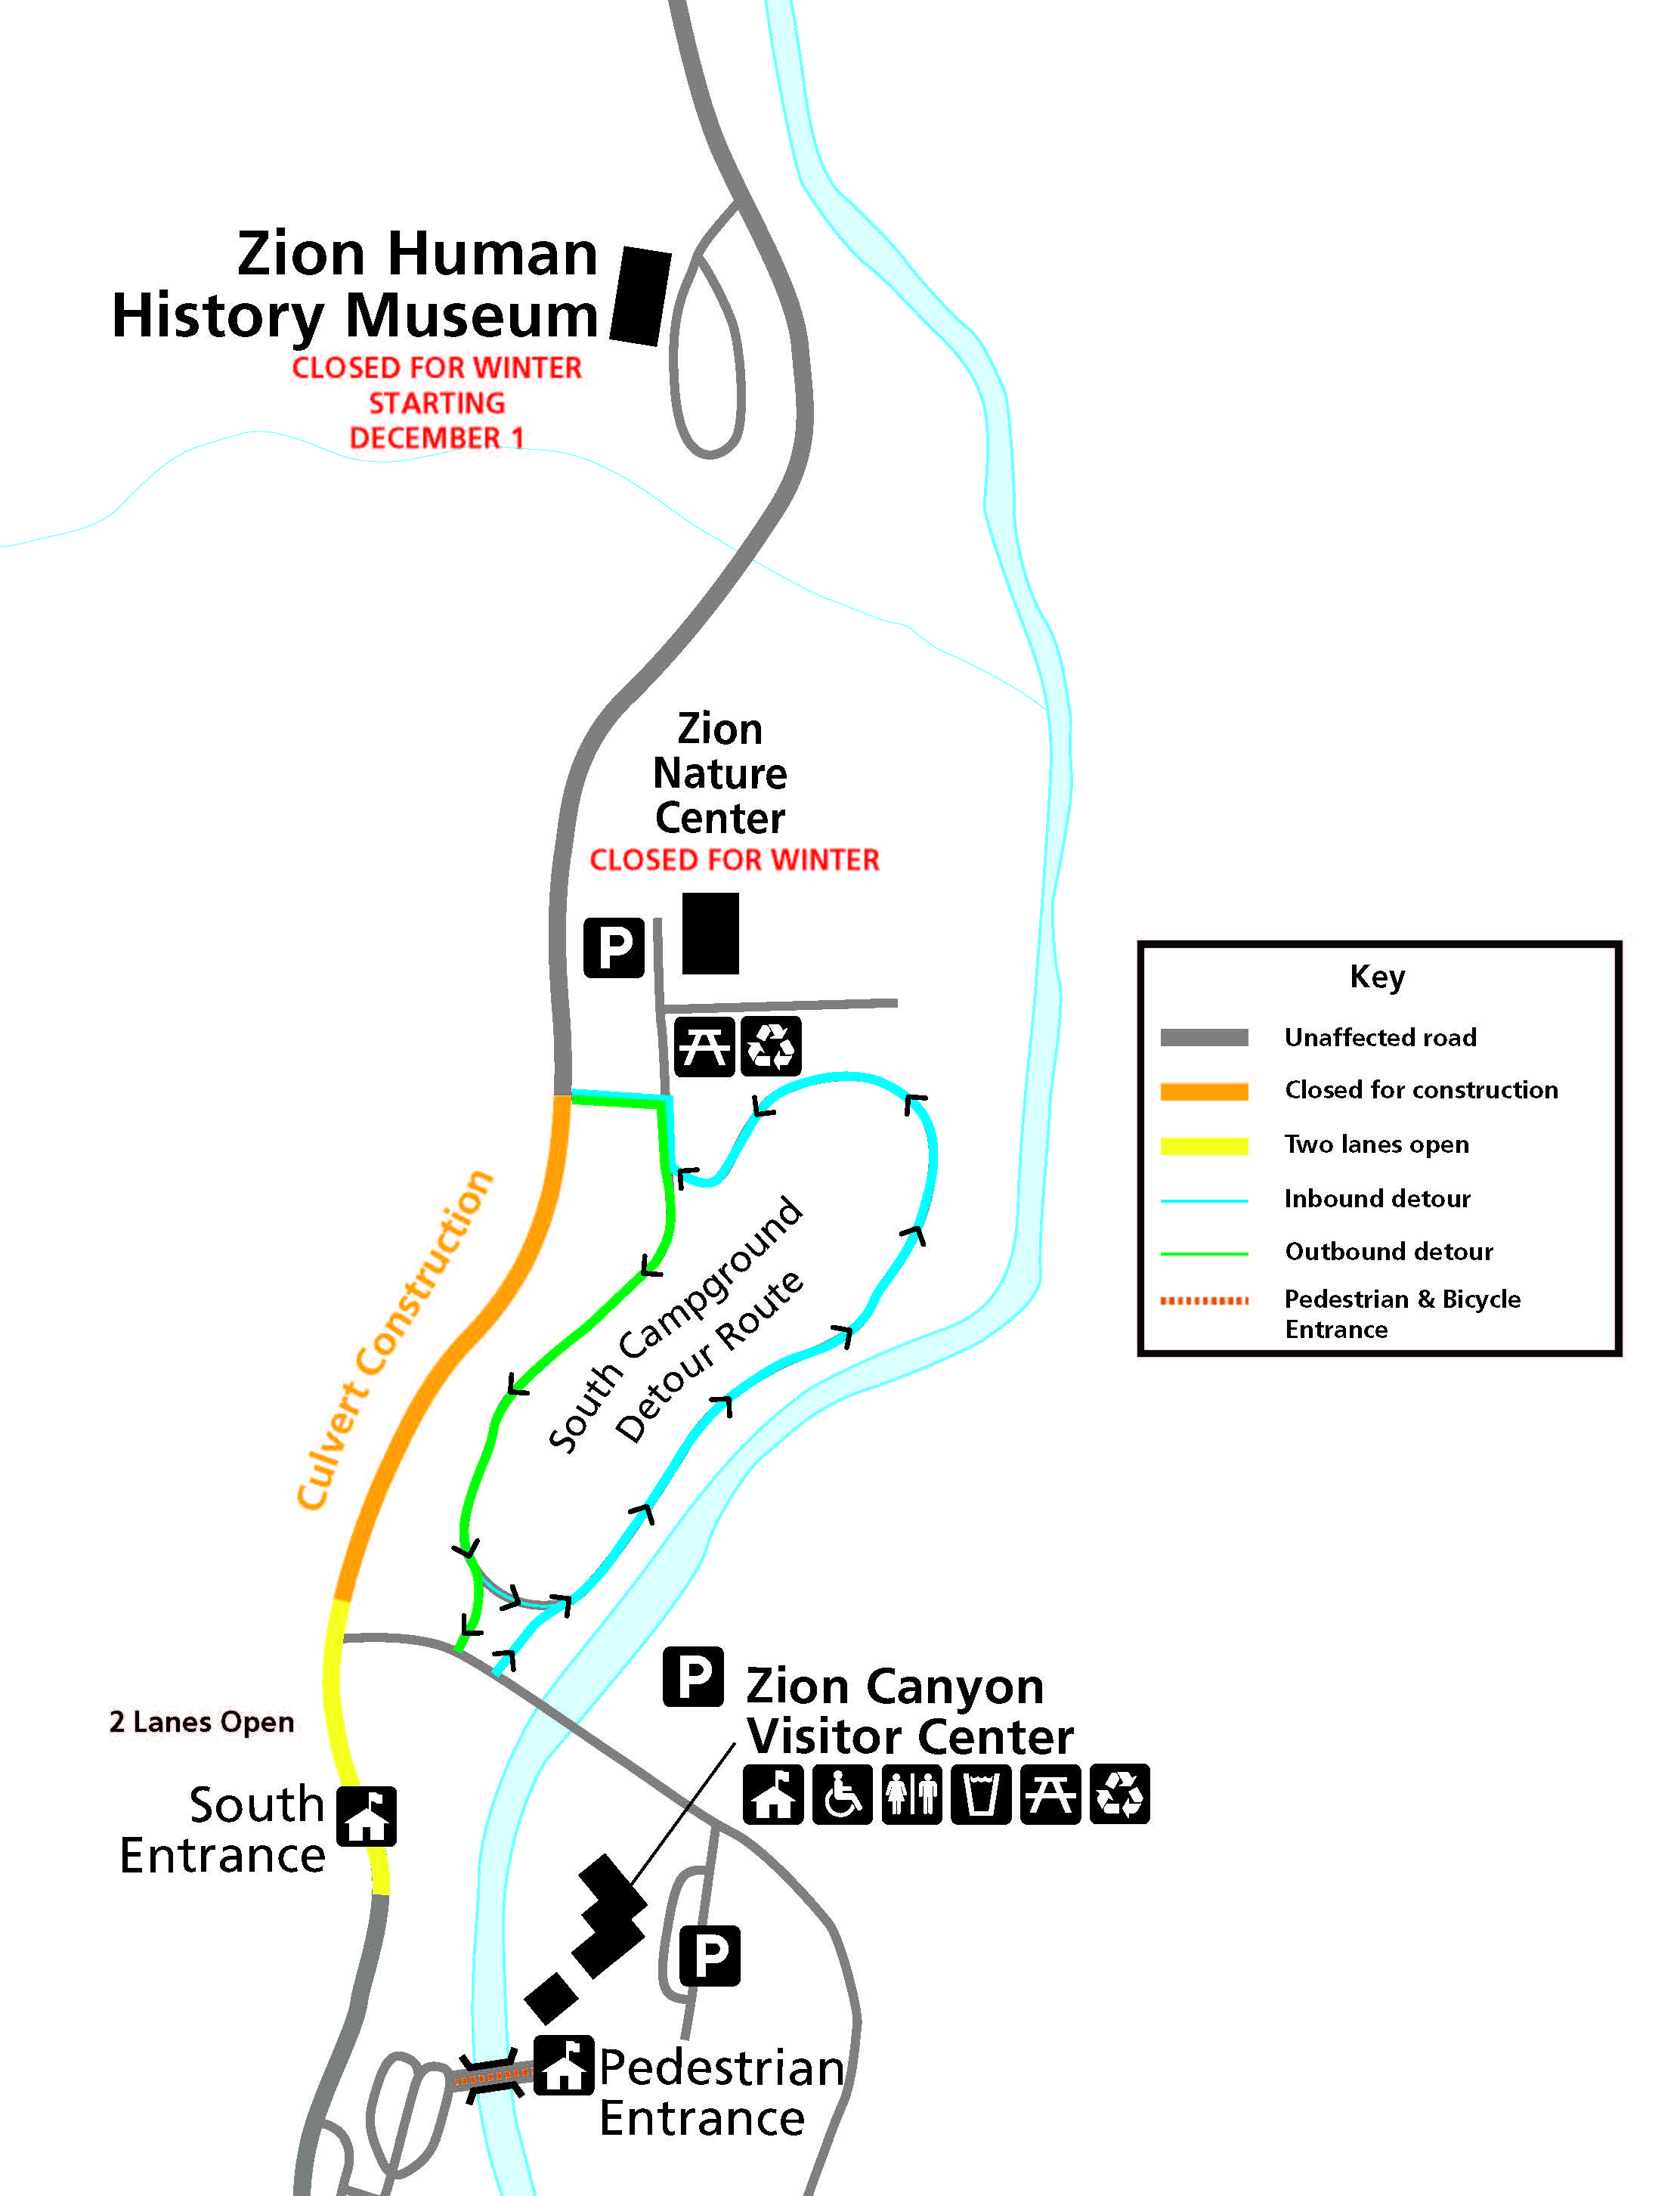 Map of the south entrance area of Zion National Park showing detour route through South Campground during culvert (drainage pipe) improvements near south entrance scheduled for winter 2022-2023